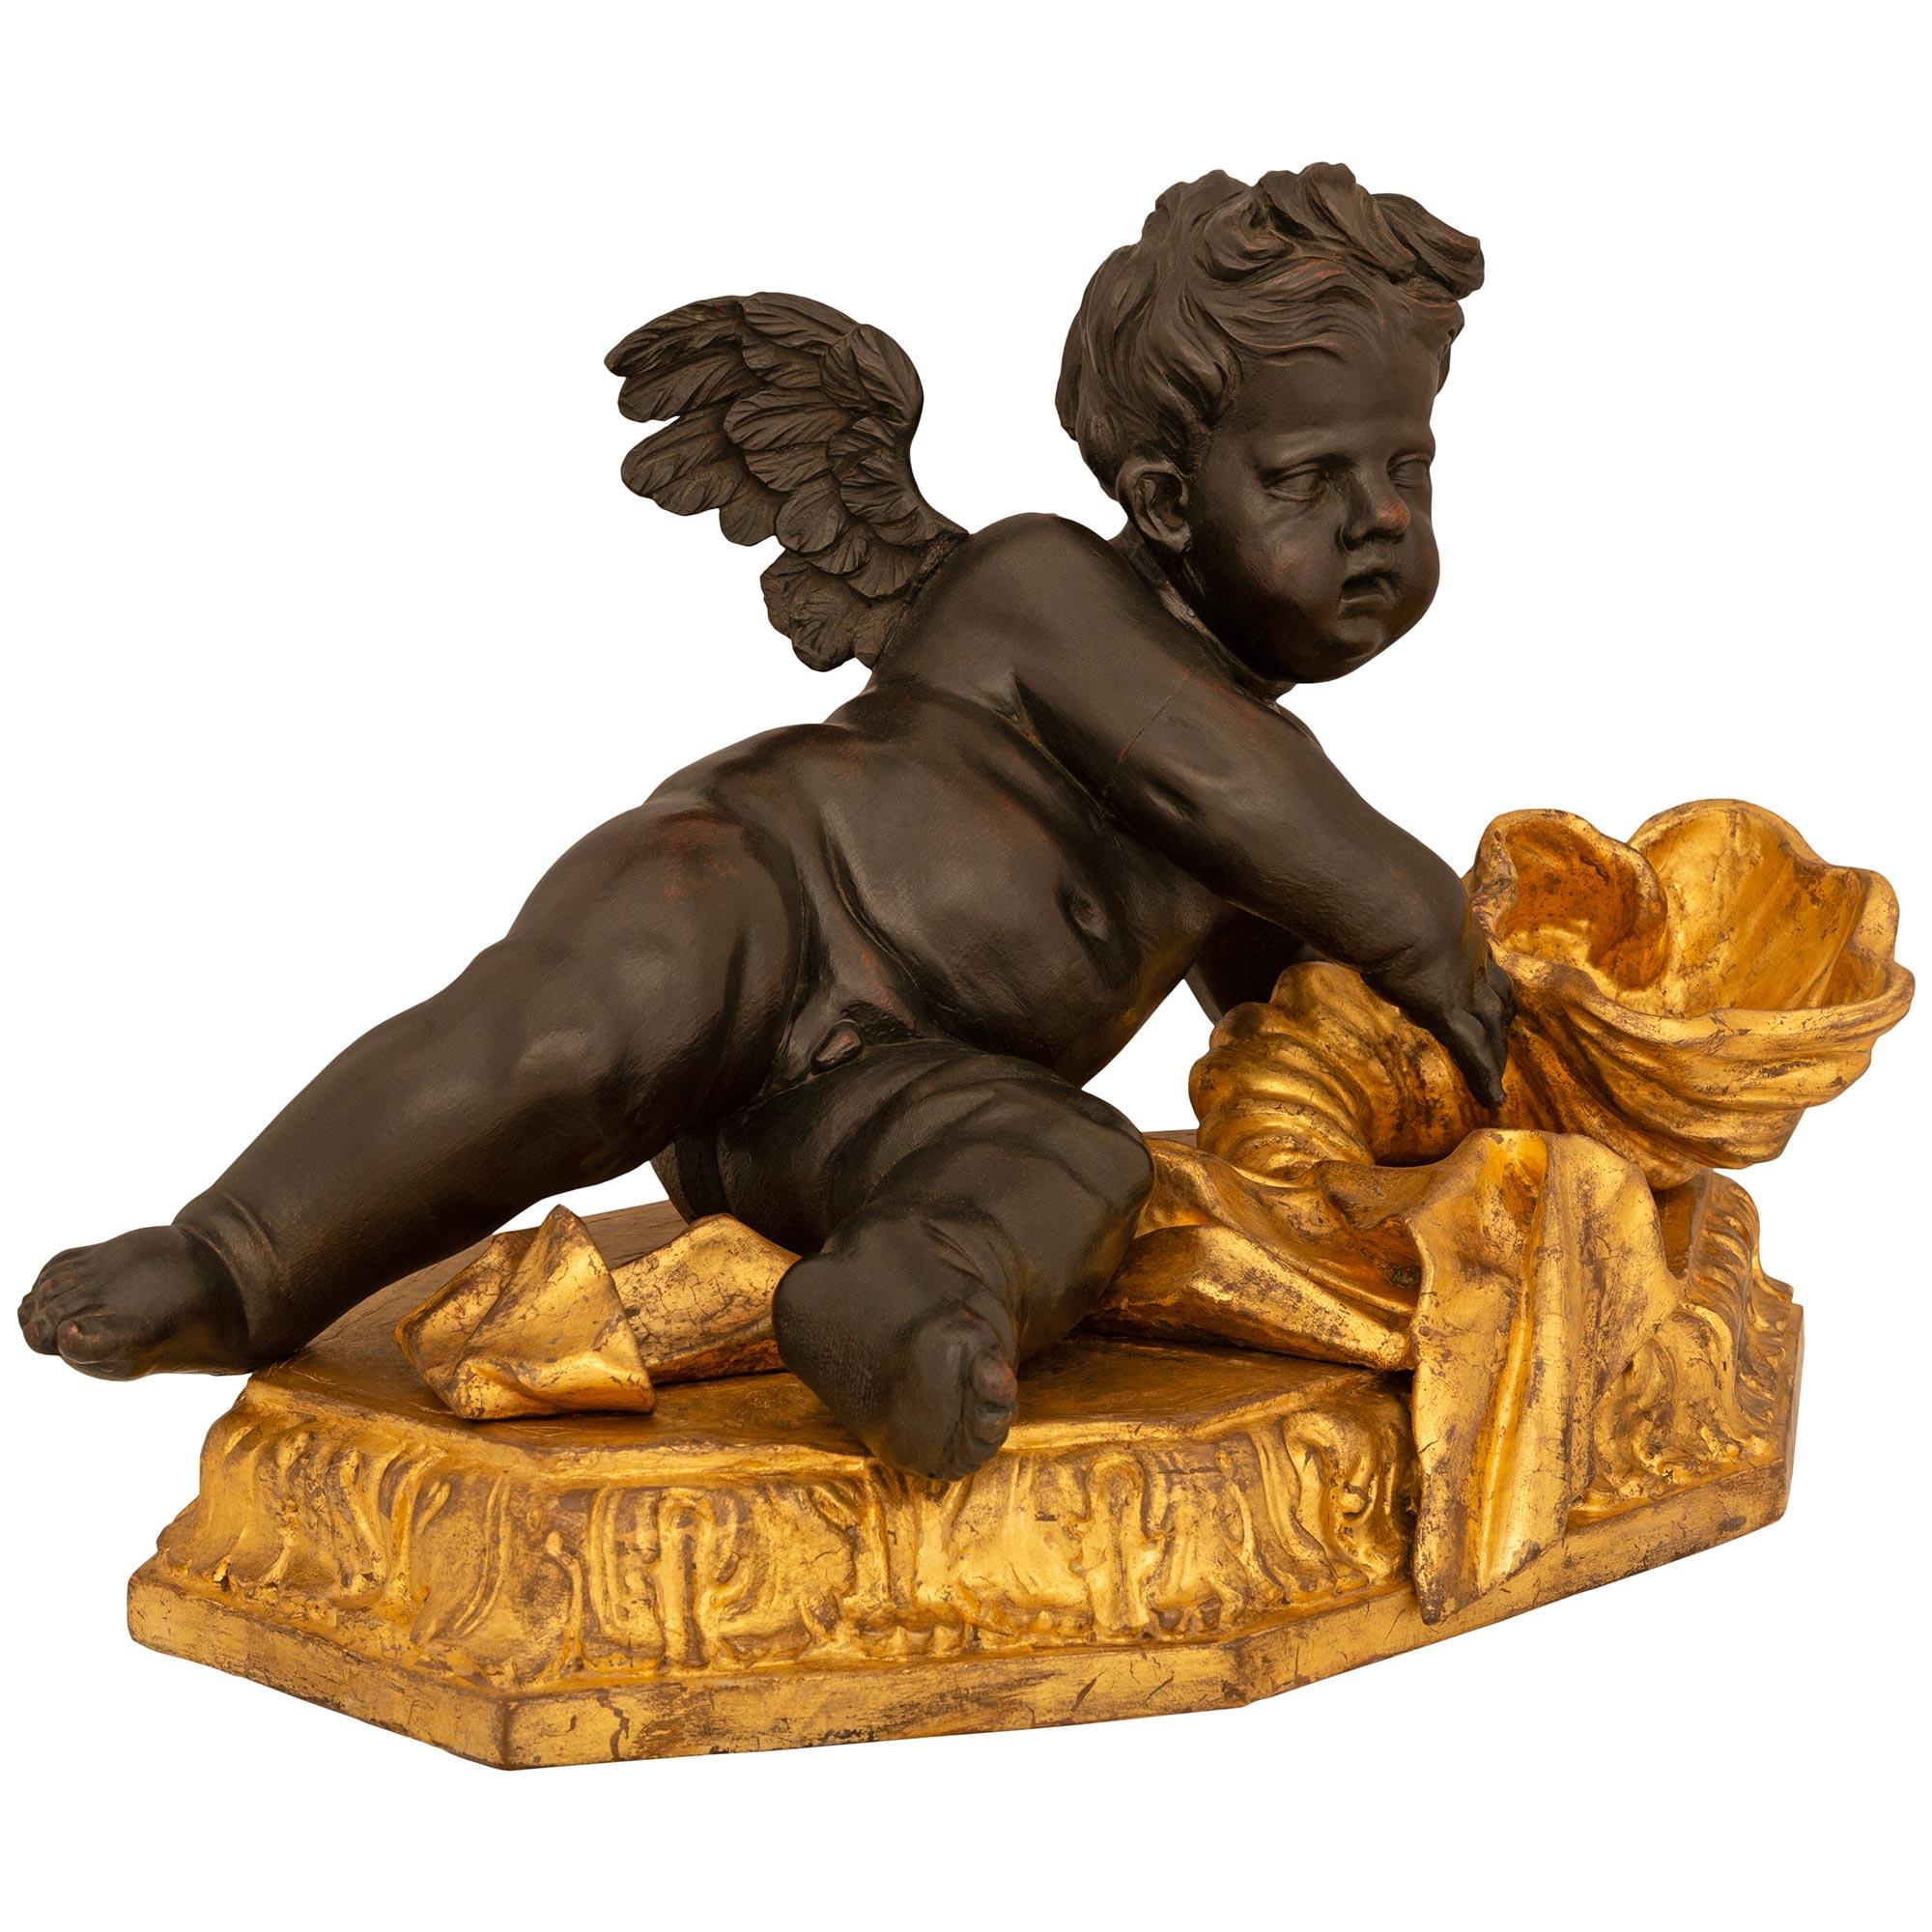 An elegant and extremely decorative Italian 17th century Baroque period Giltwood and patinated wood Putti statue. The statue is raised by a Giltwood plinth with a Coeur-de-Rai carved edge. Above the plinth is a patinated wood winged putti posing